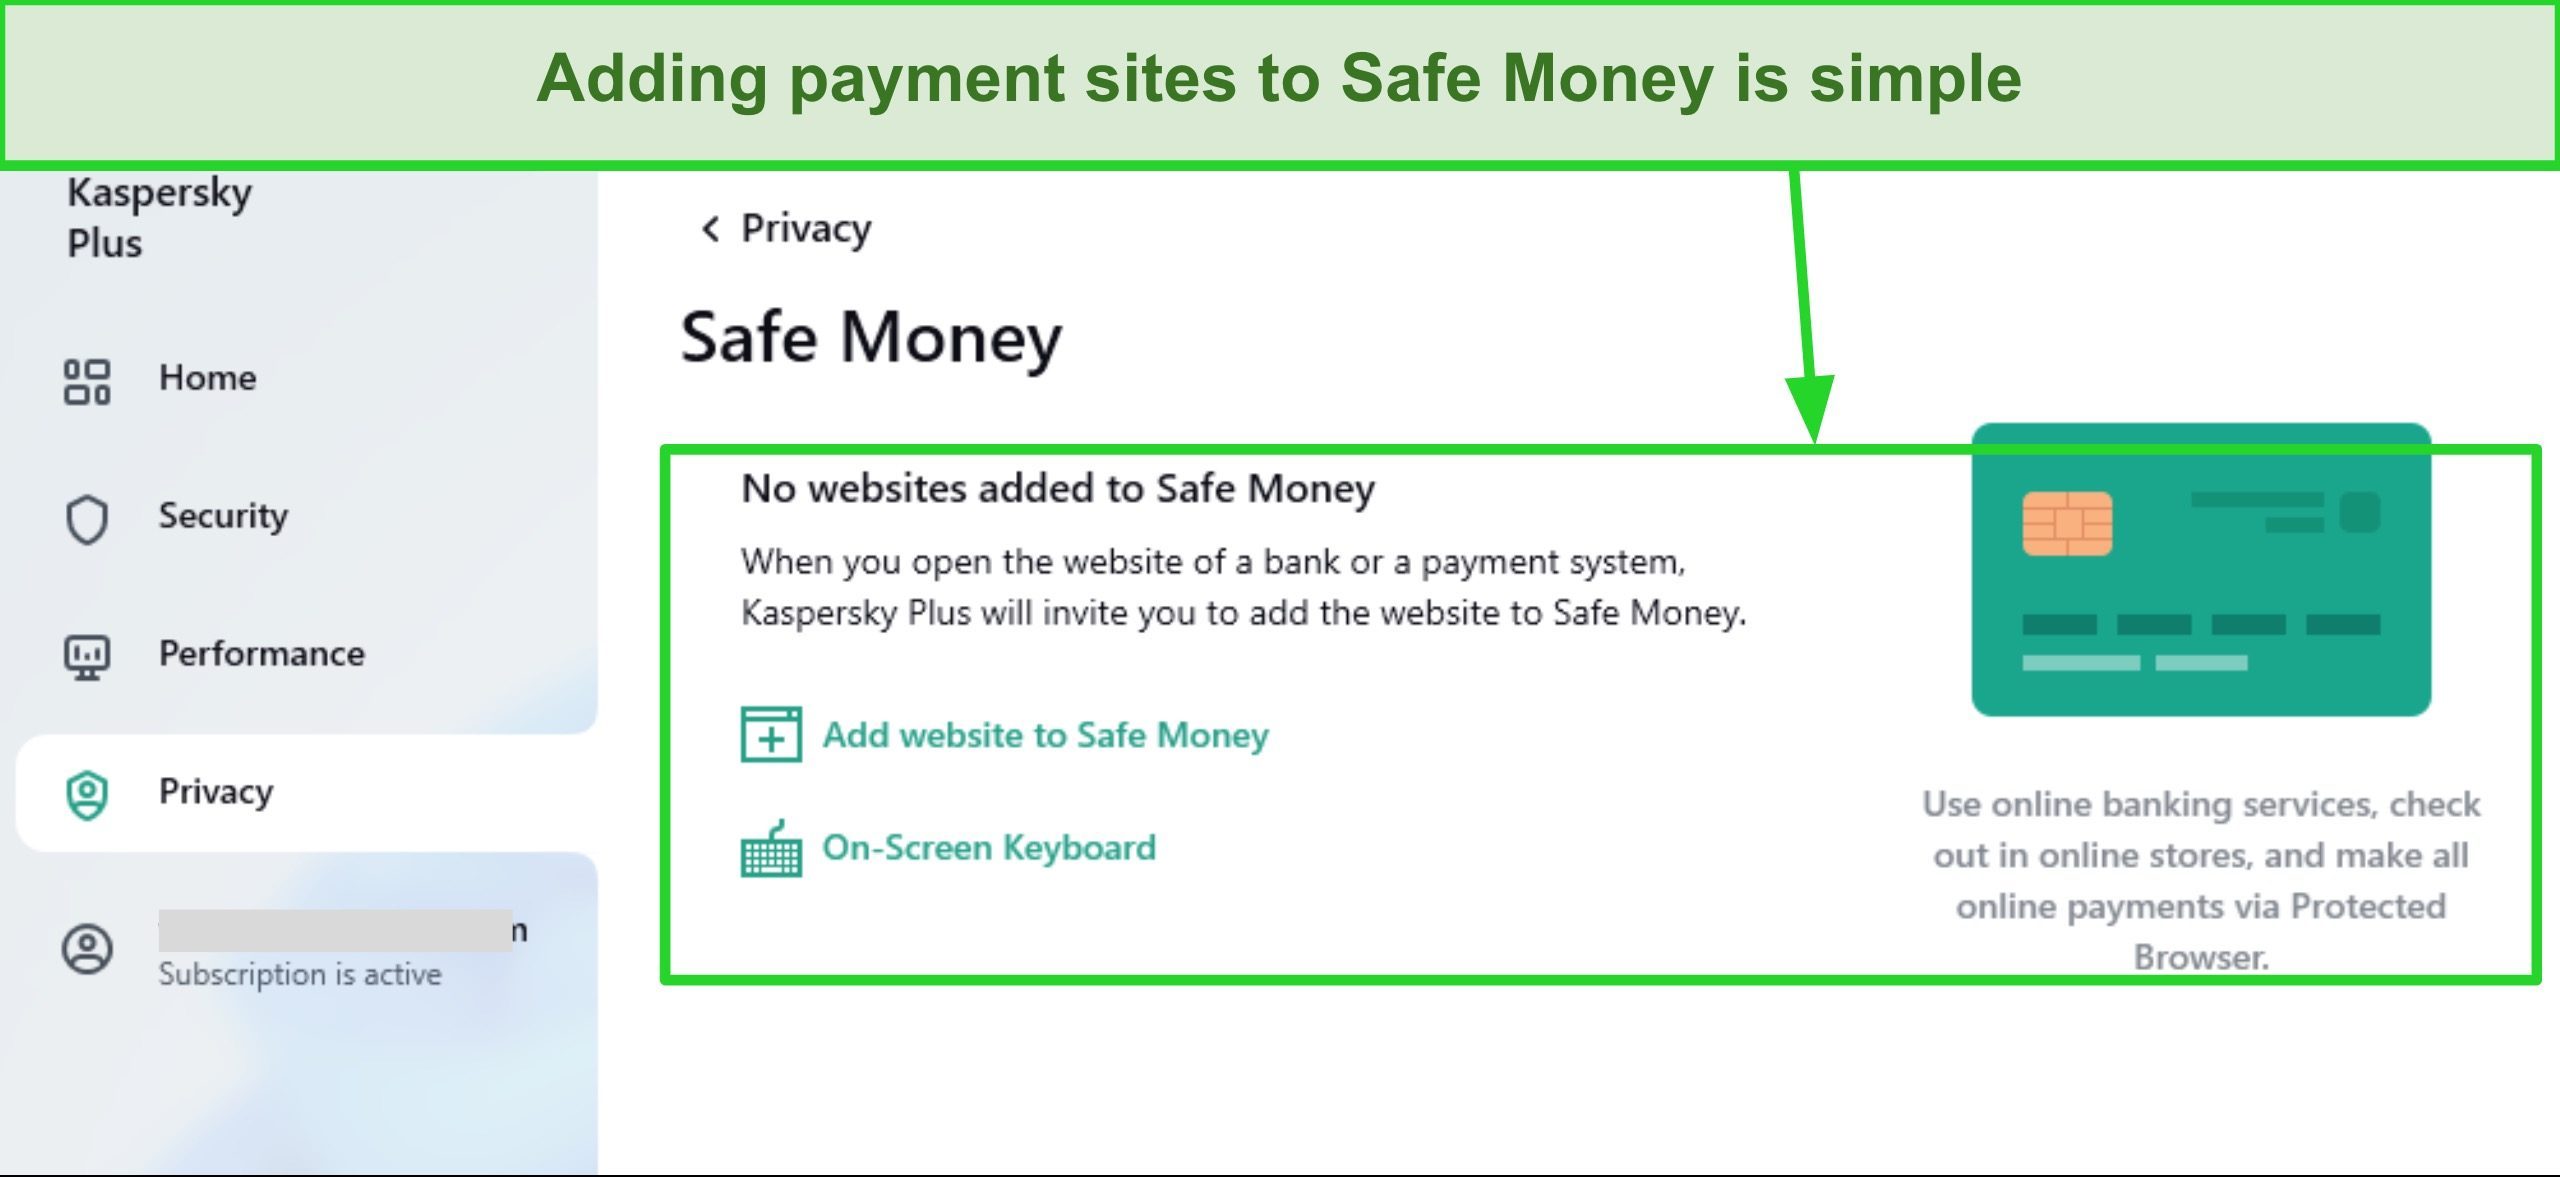 Safe Money provides a secure way to bank and shop online